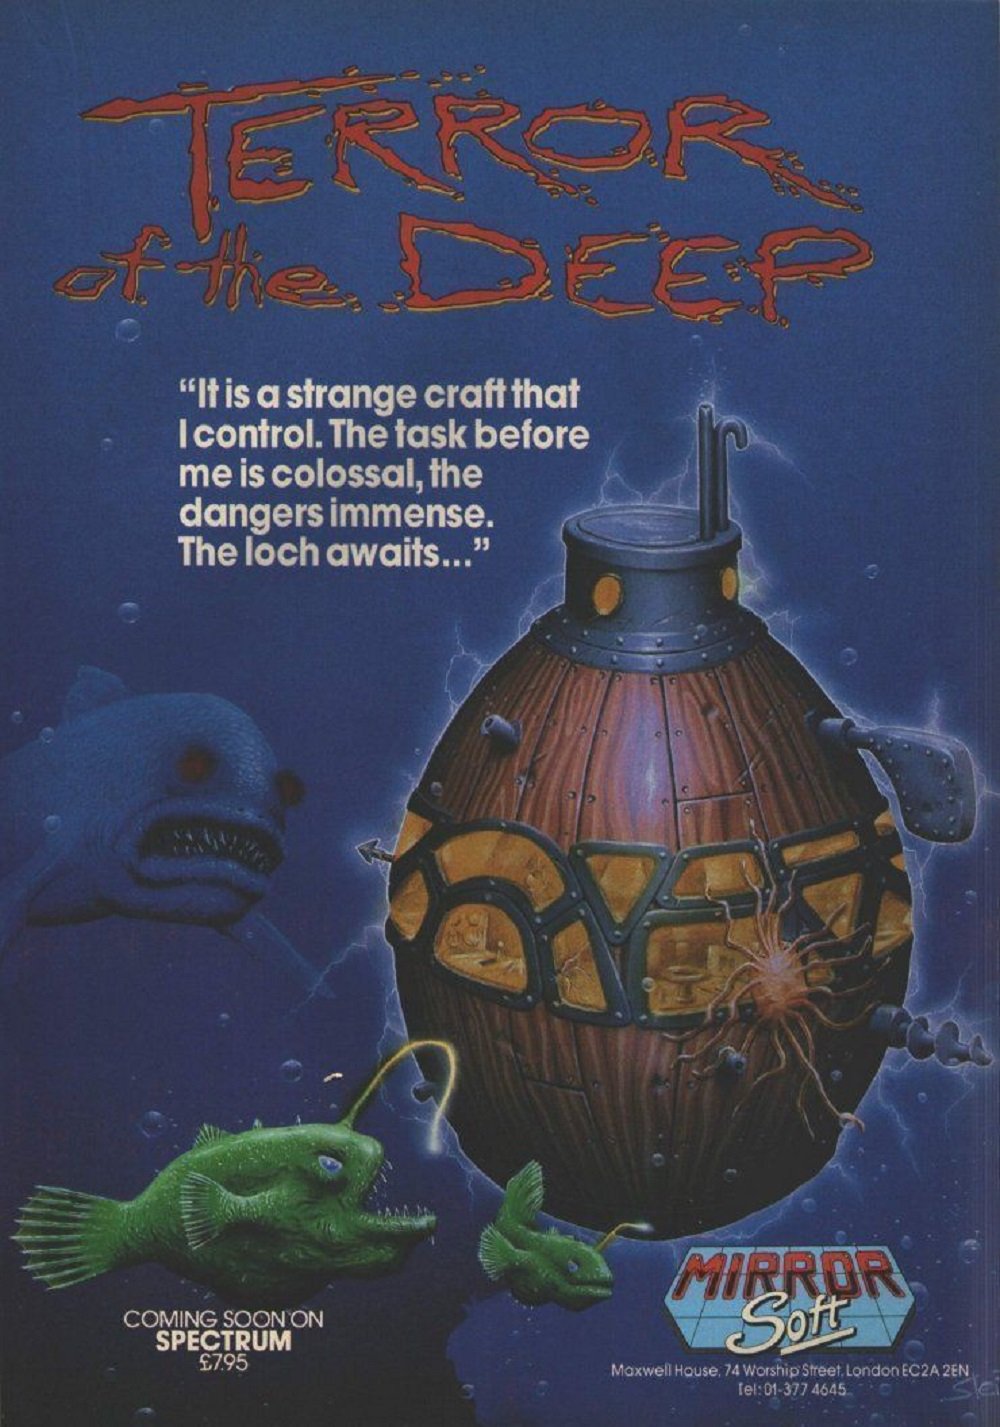 Image of Terror of the Deep